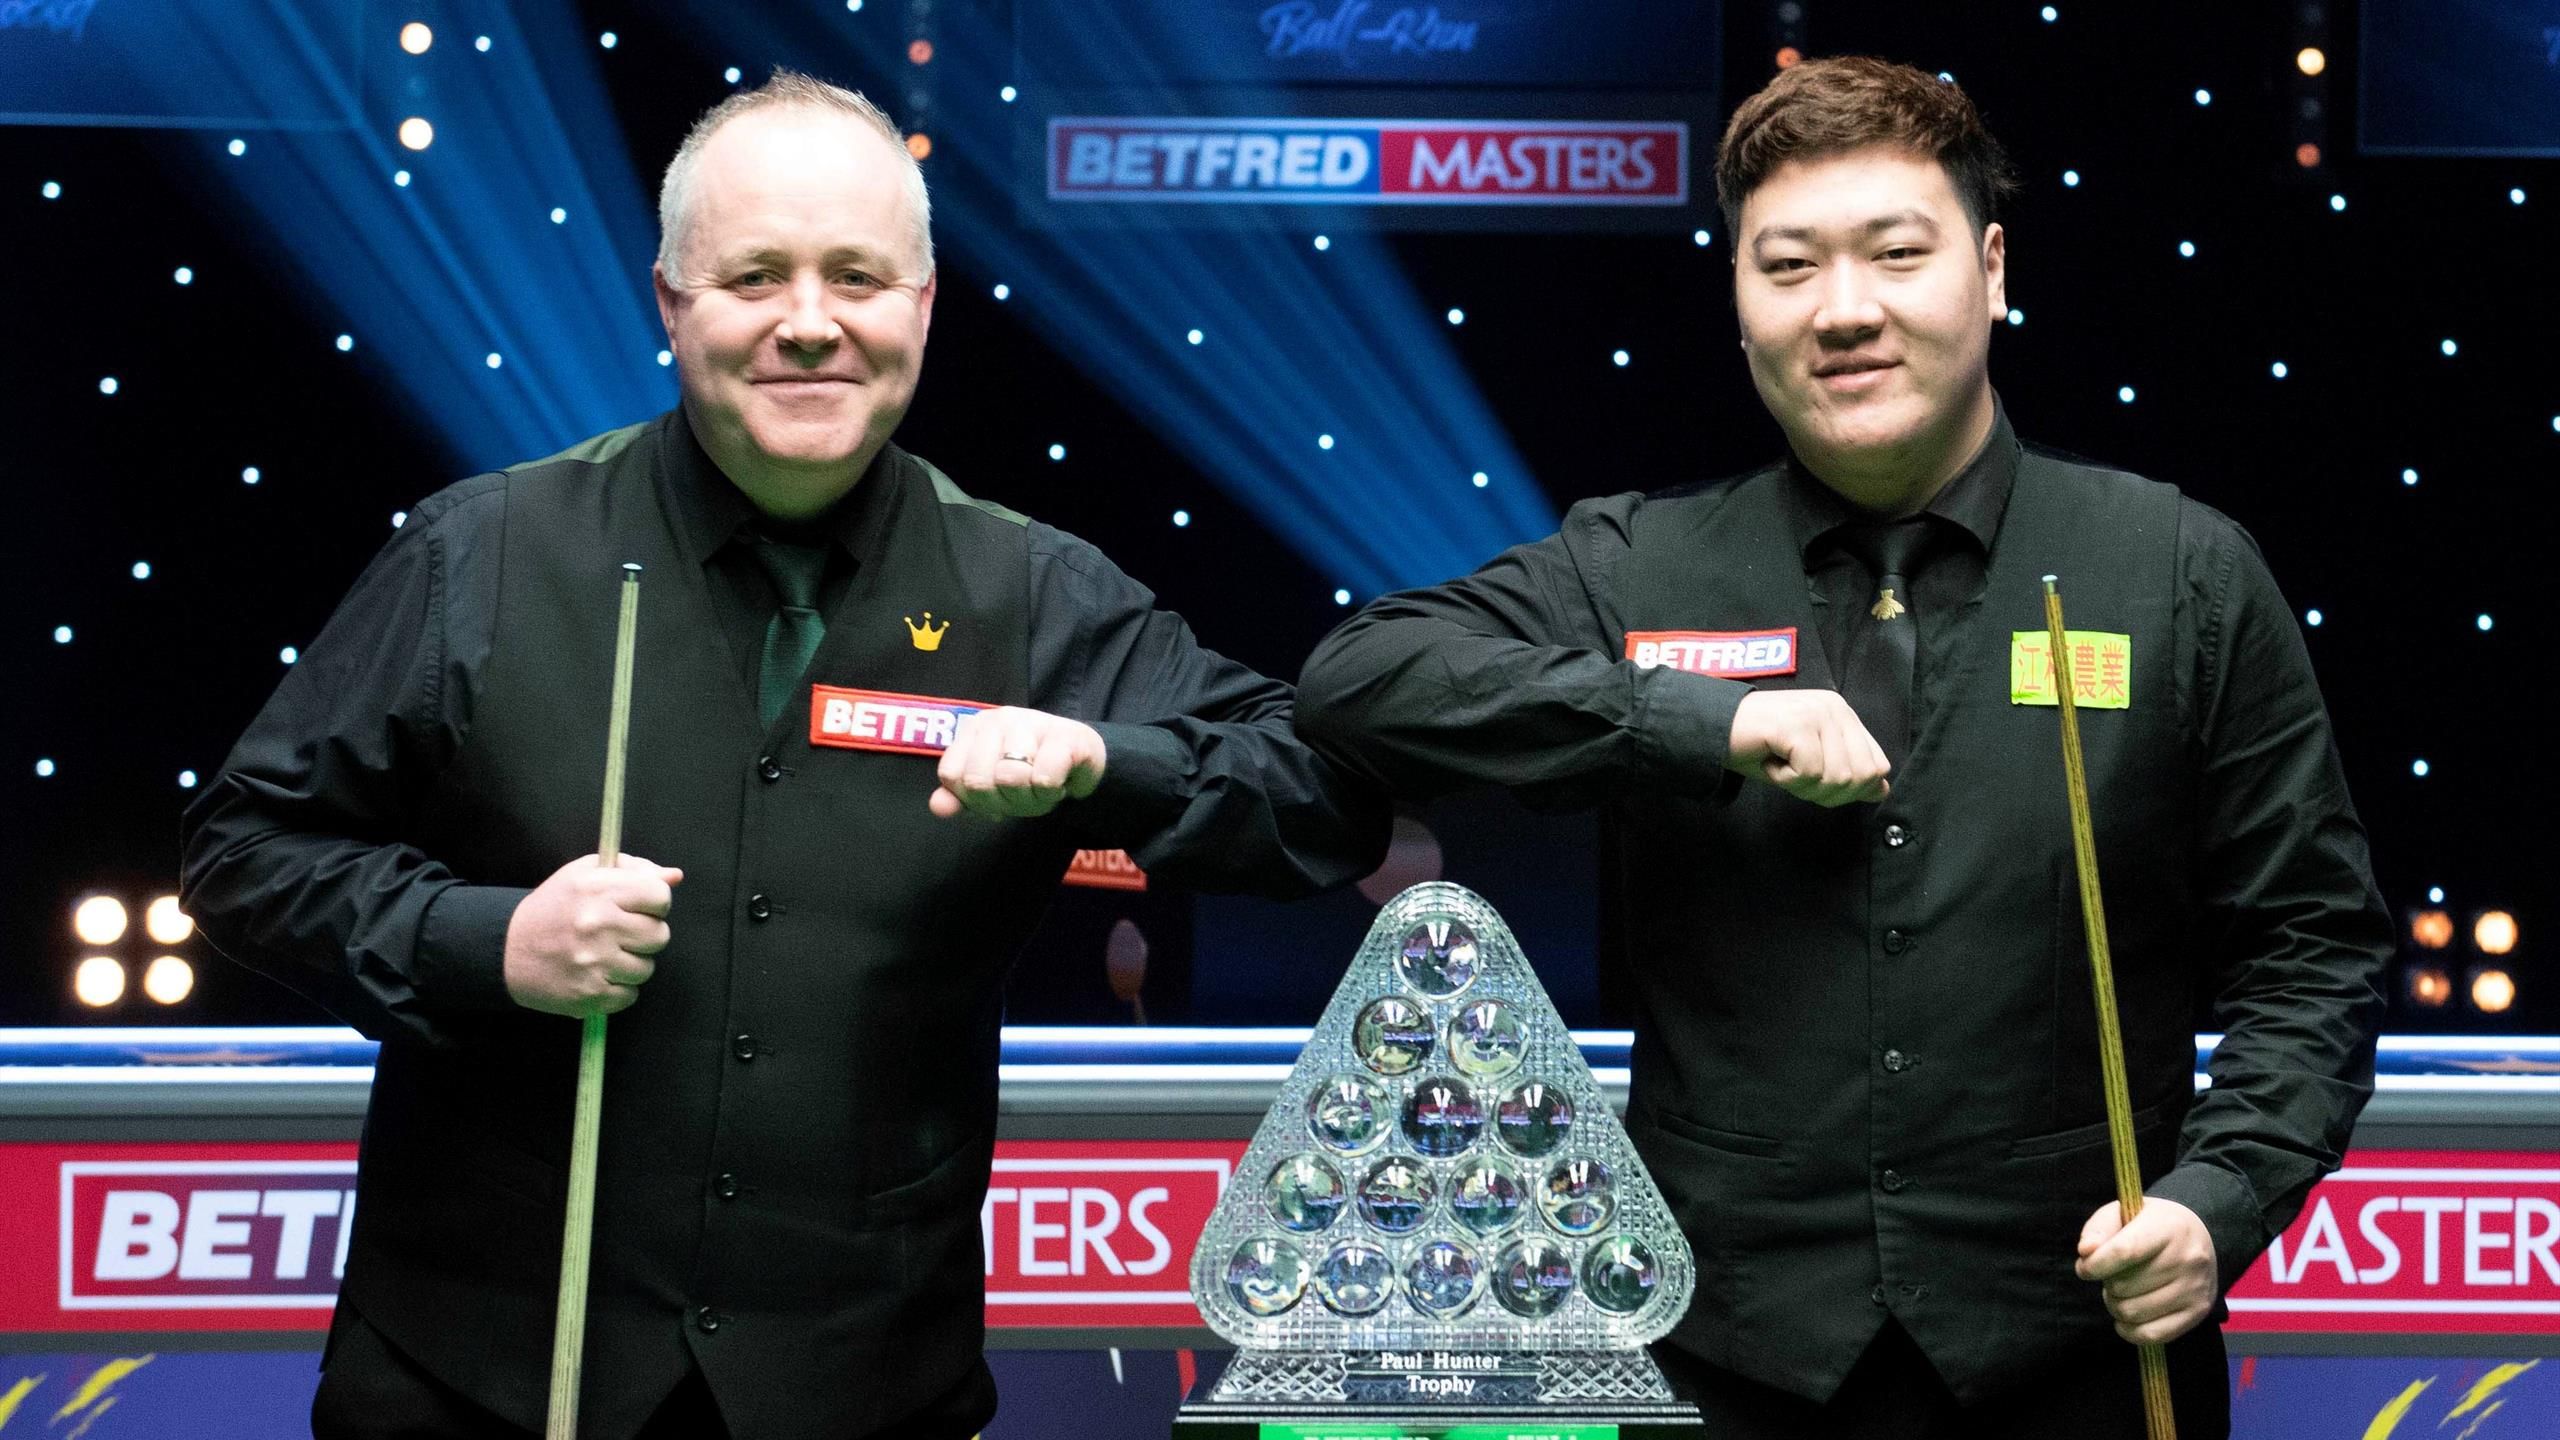 live masters snooker final